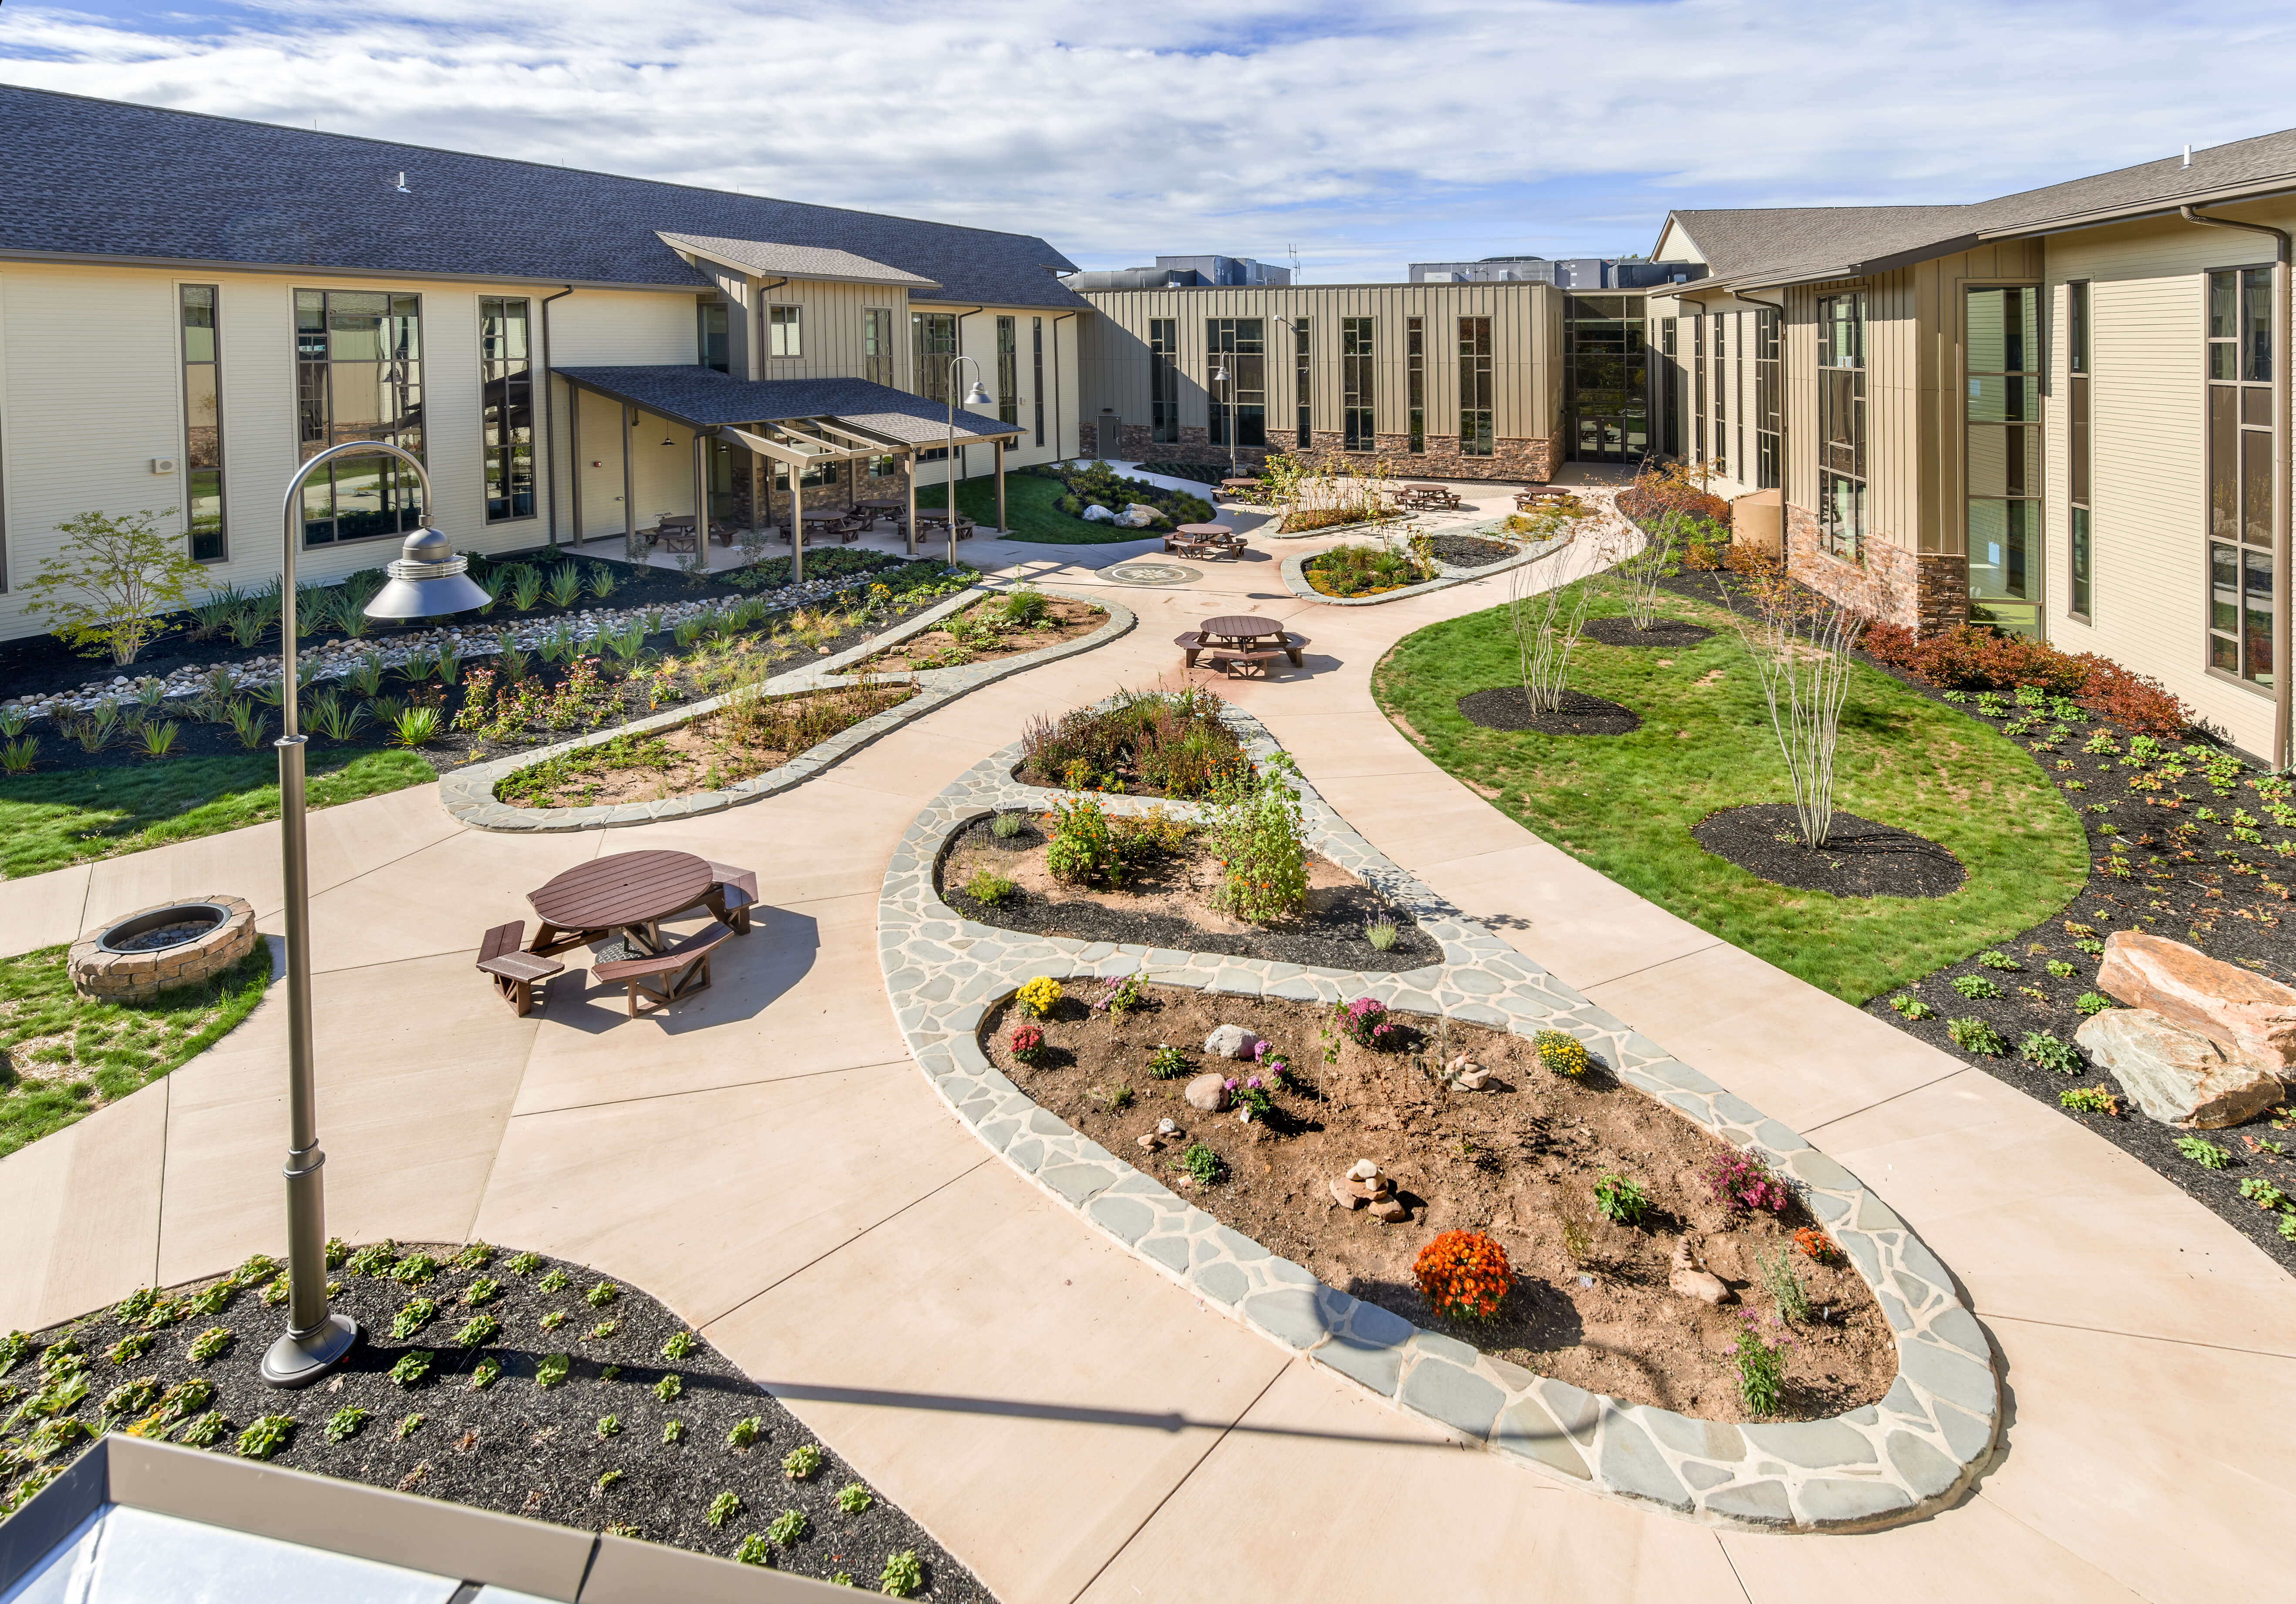 Integrating nature and structure: Bear Creek Community Charter School